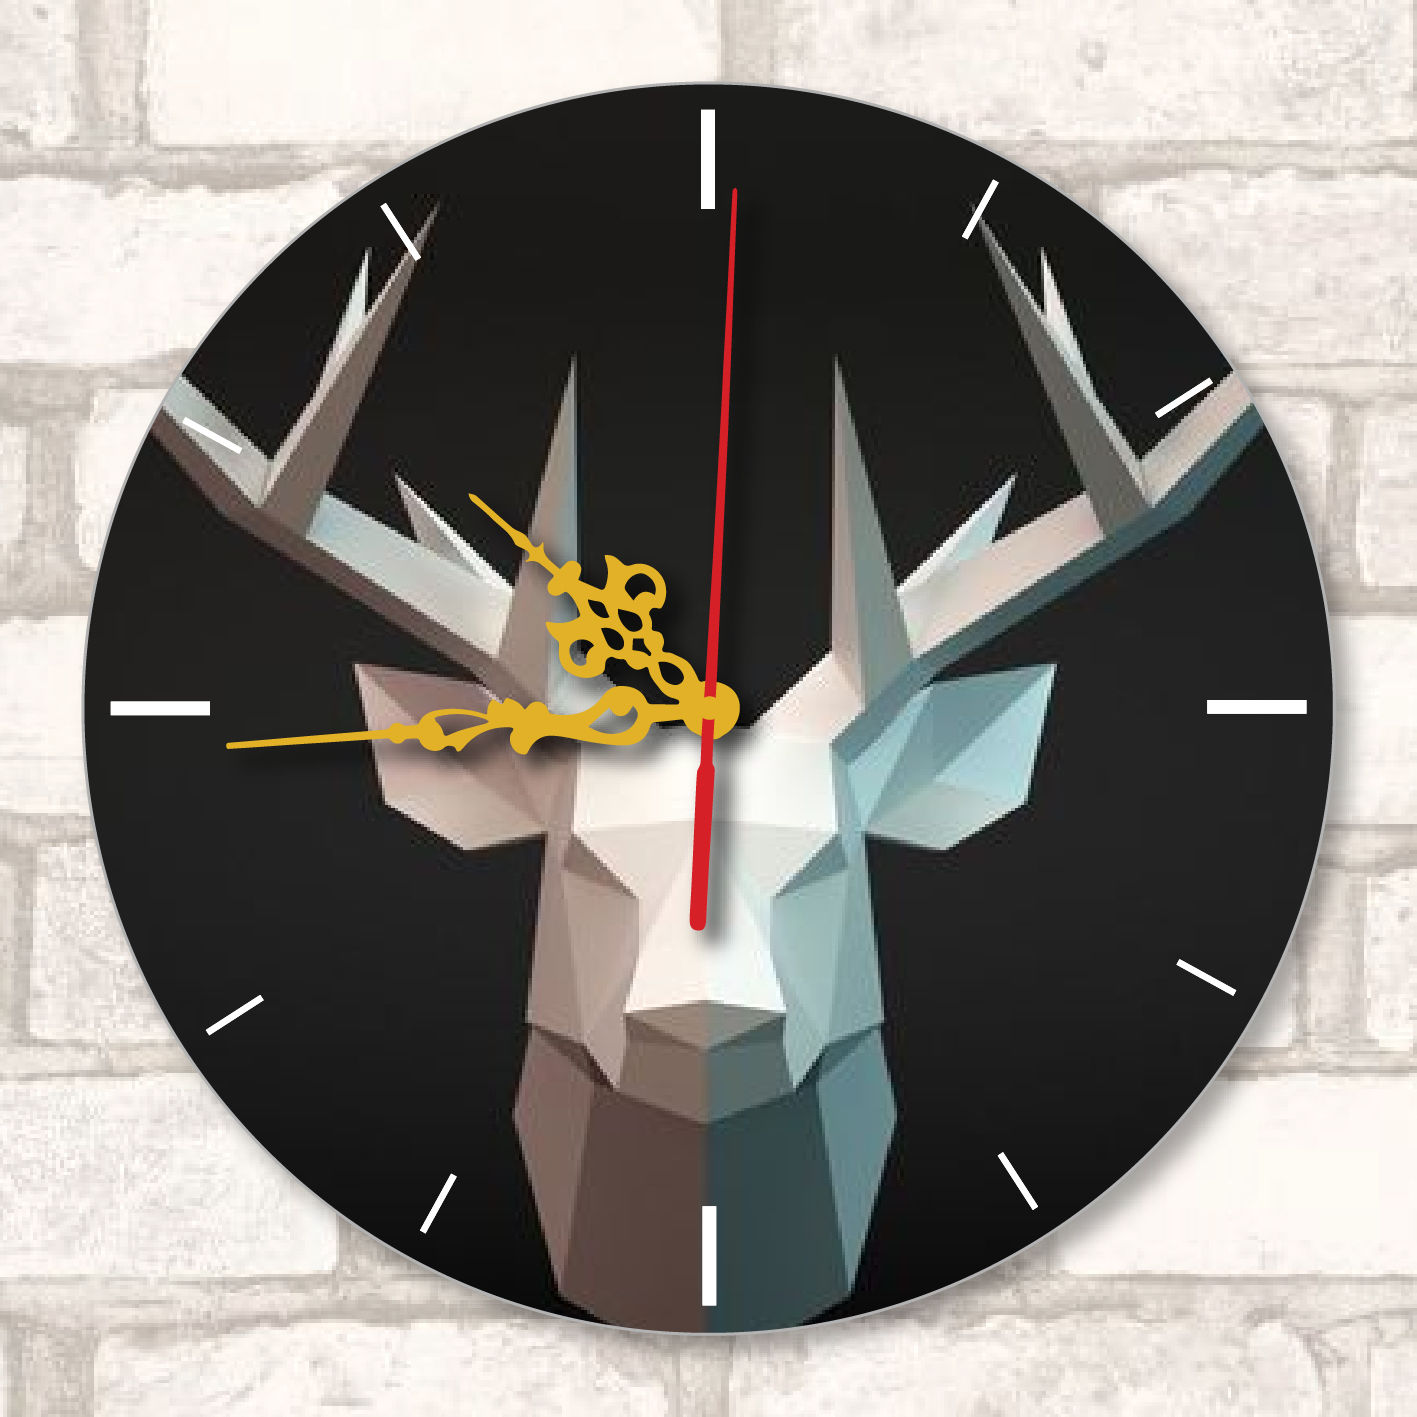 Print on wall round clock with gold hands (24 cm)